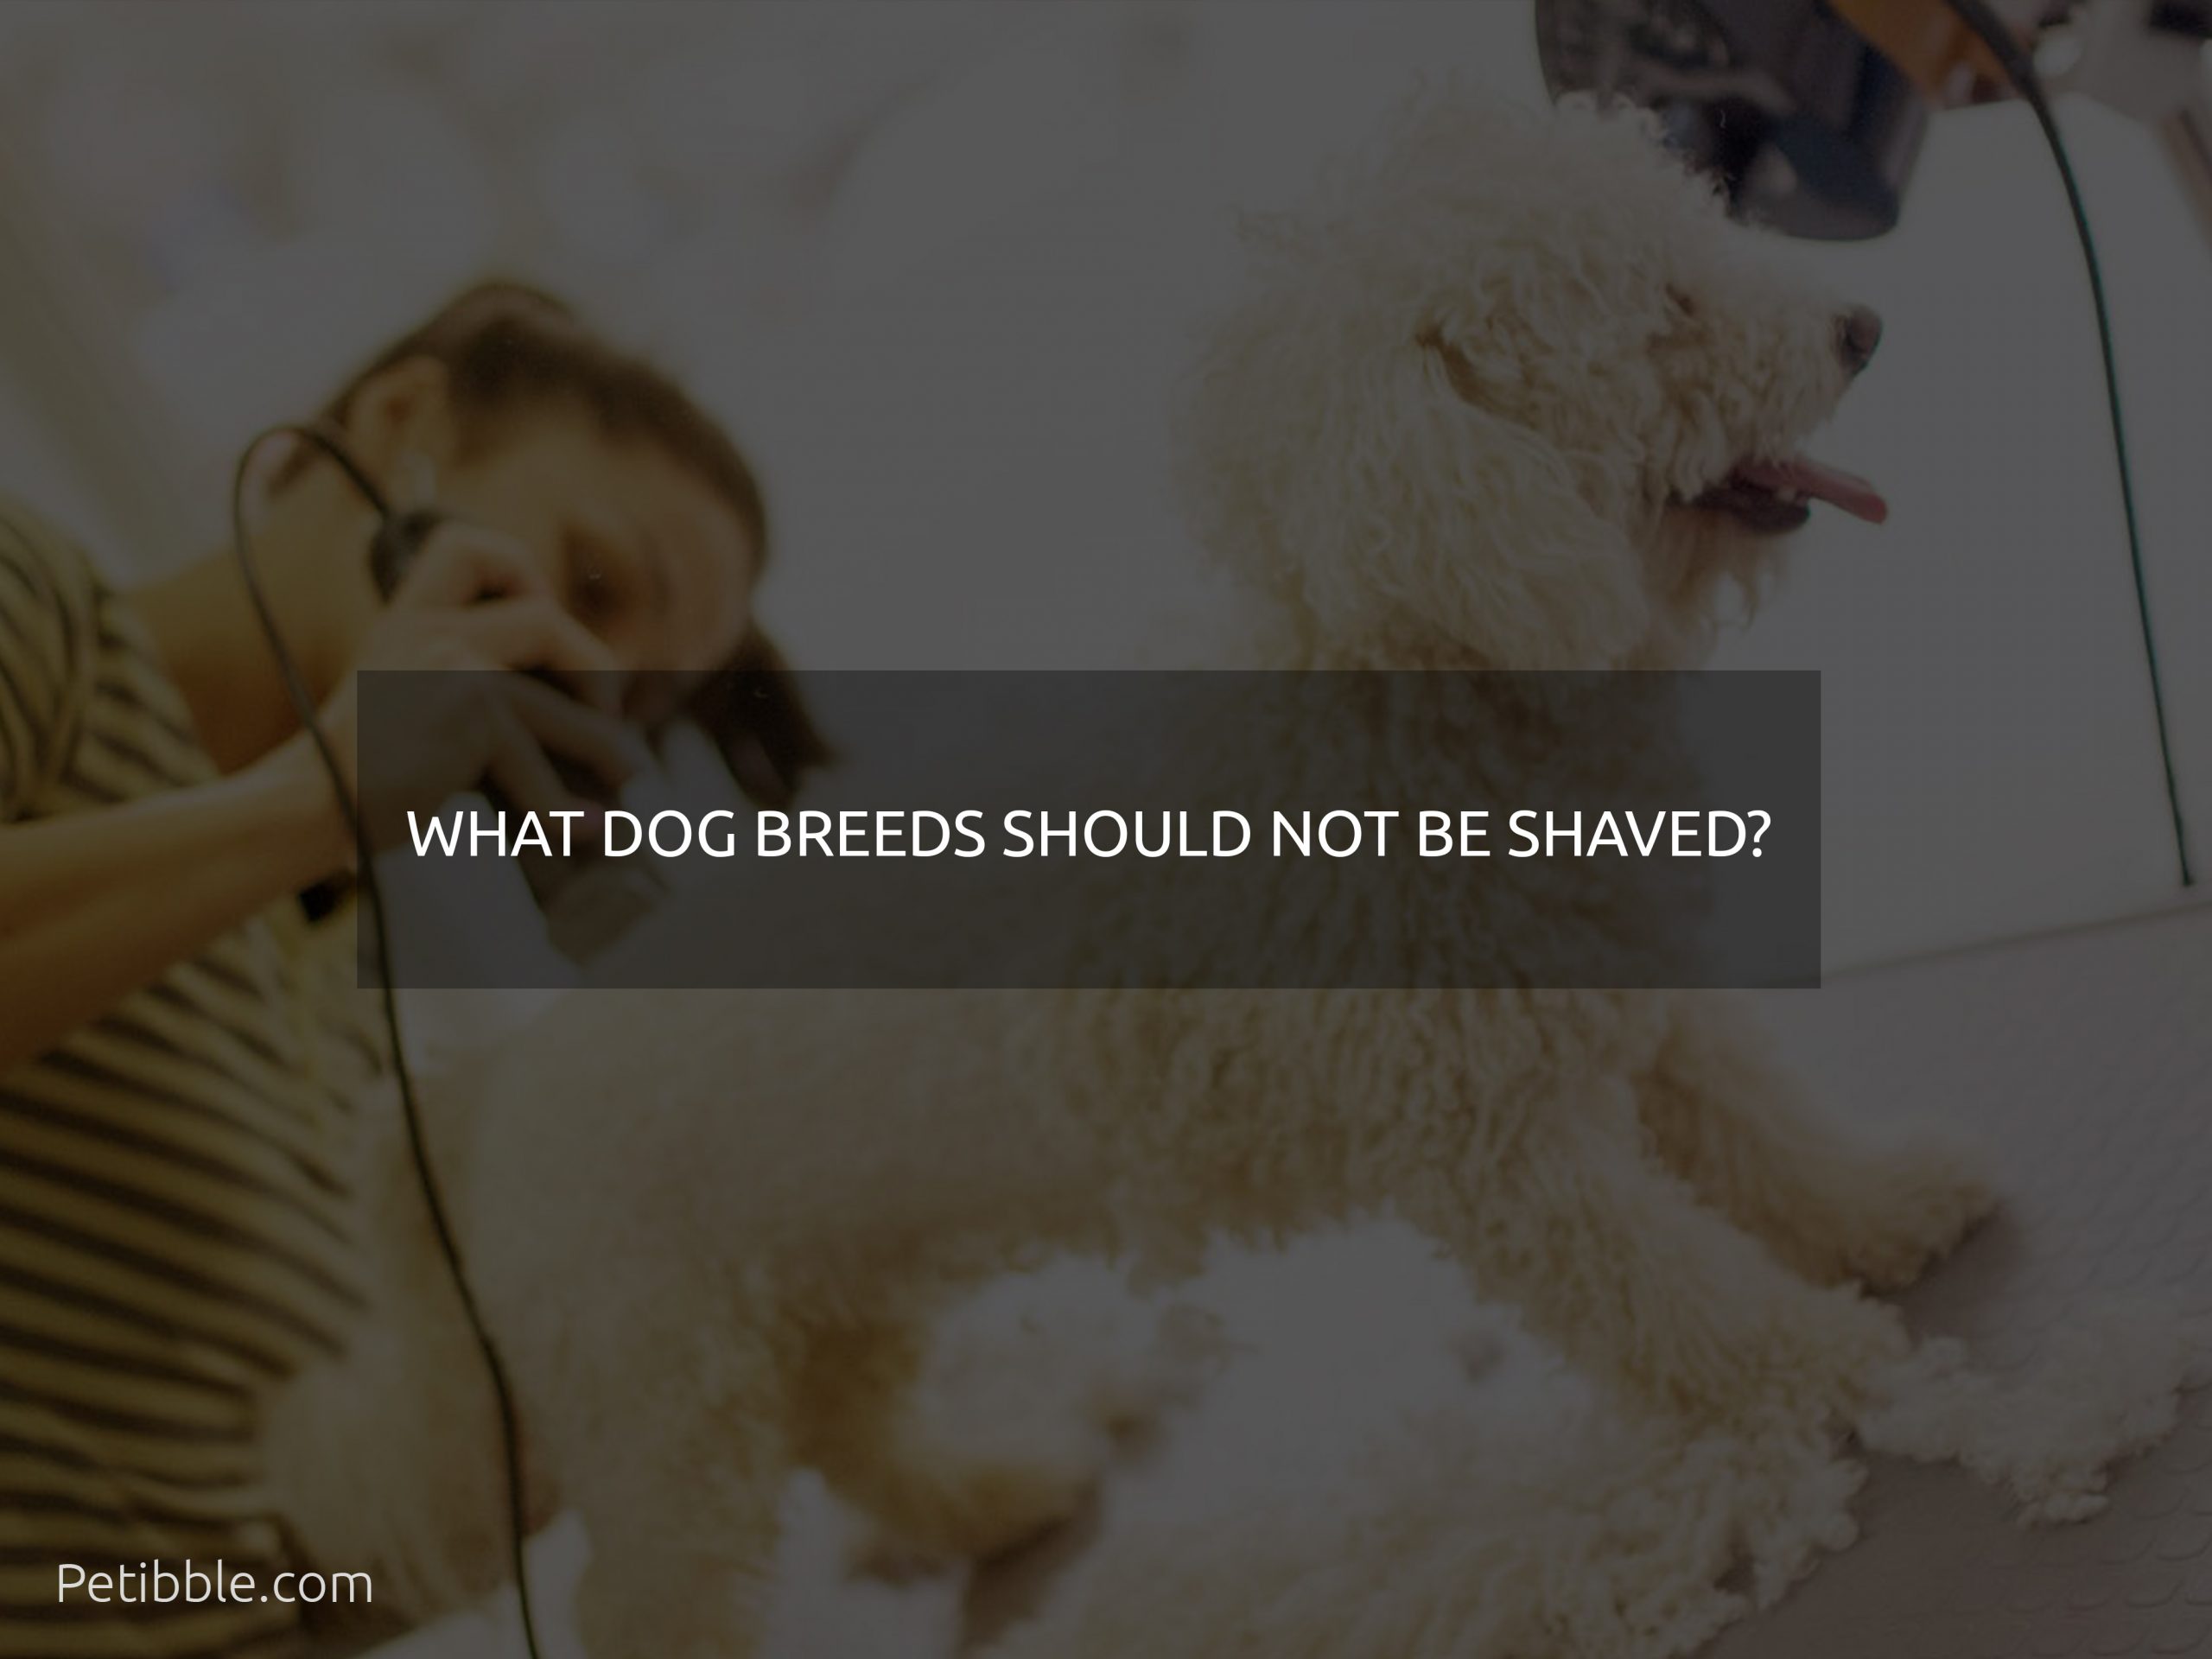 what dog breeds should not be shaved?